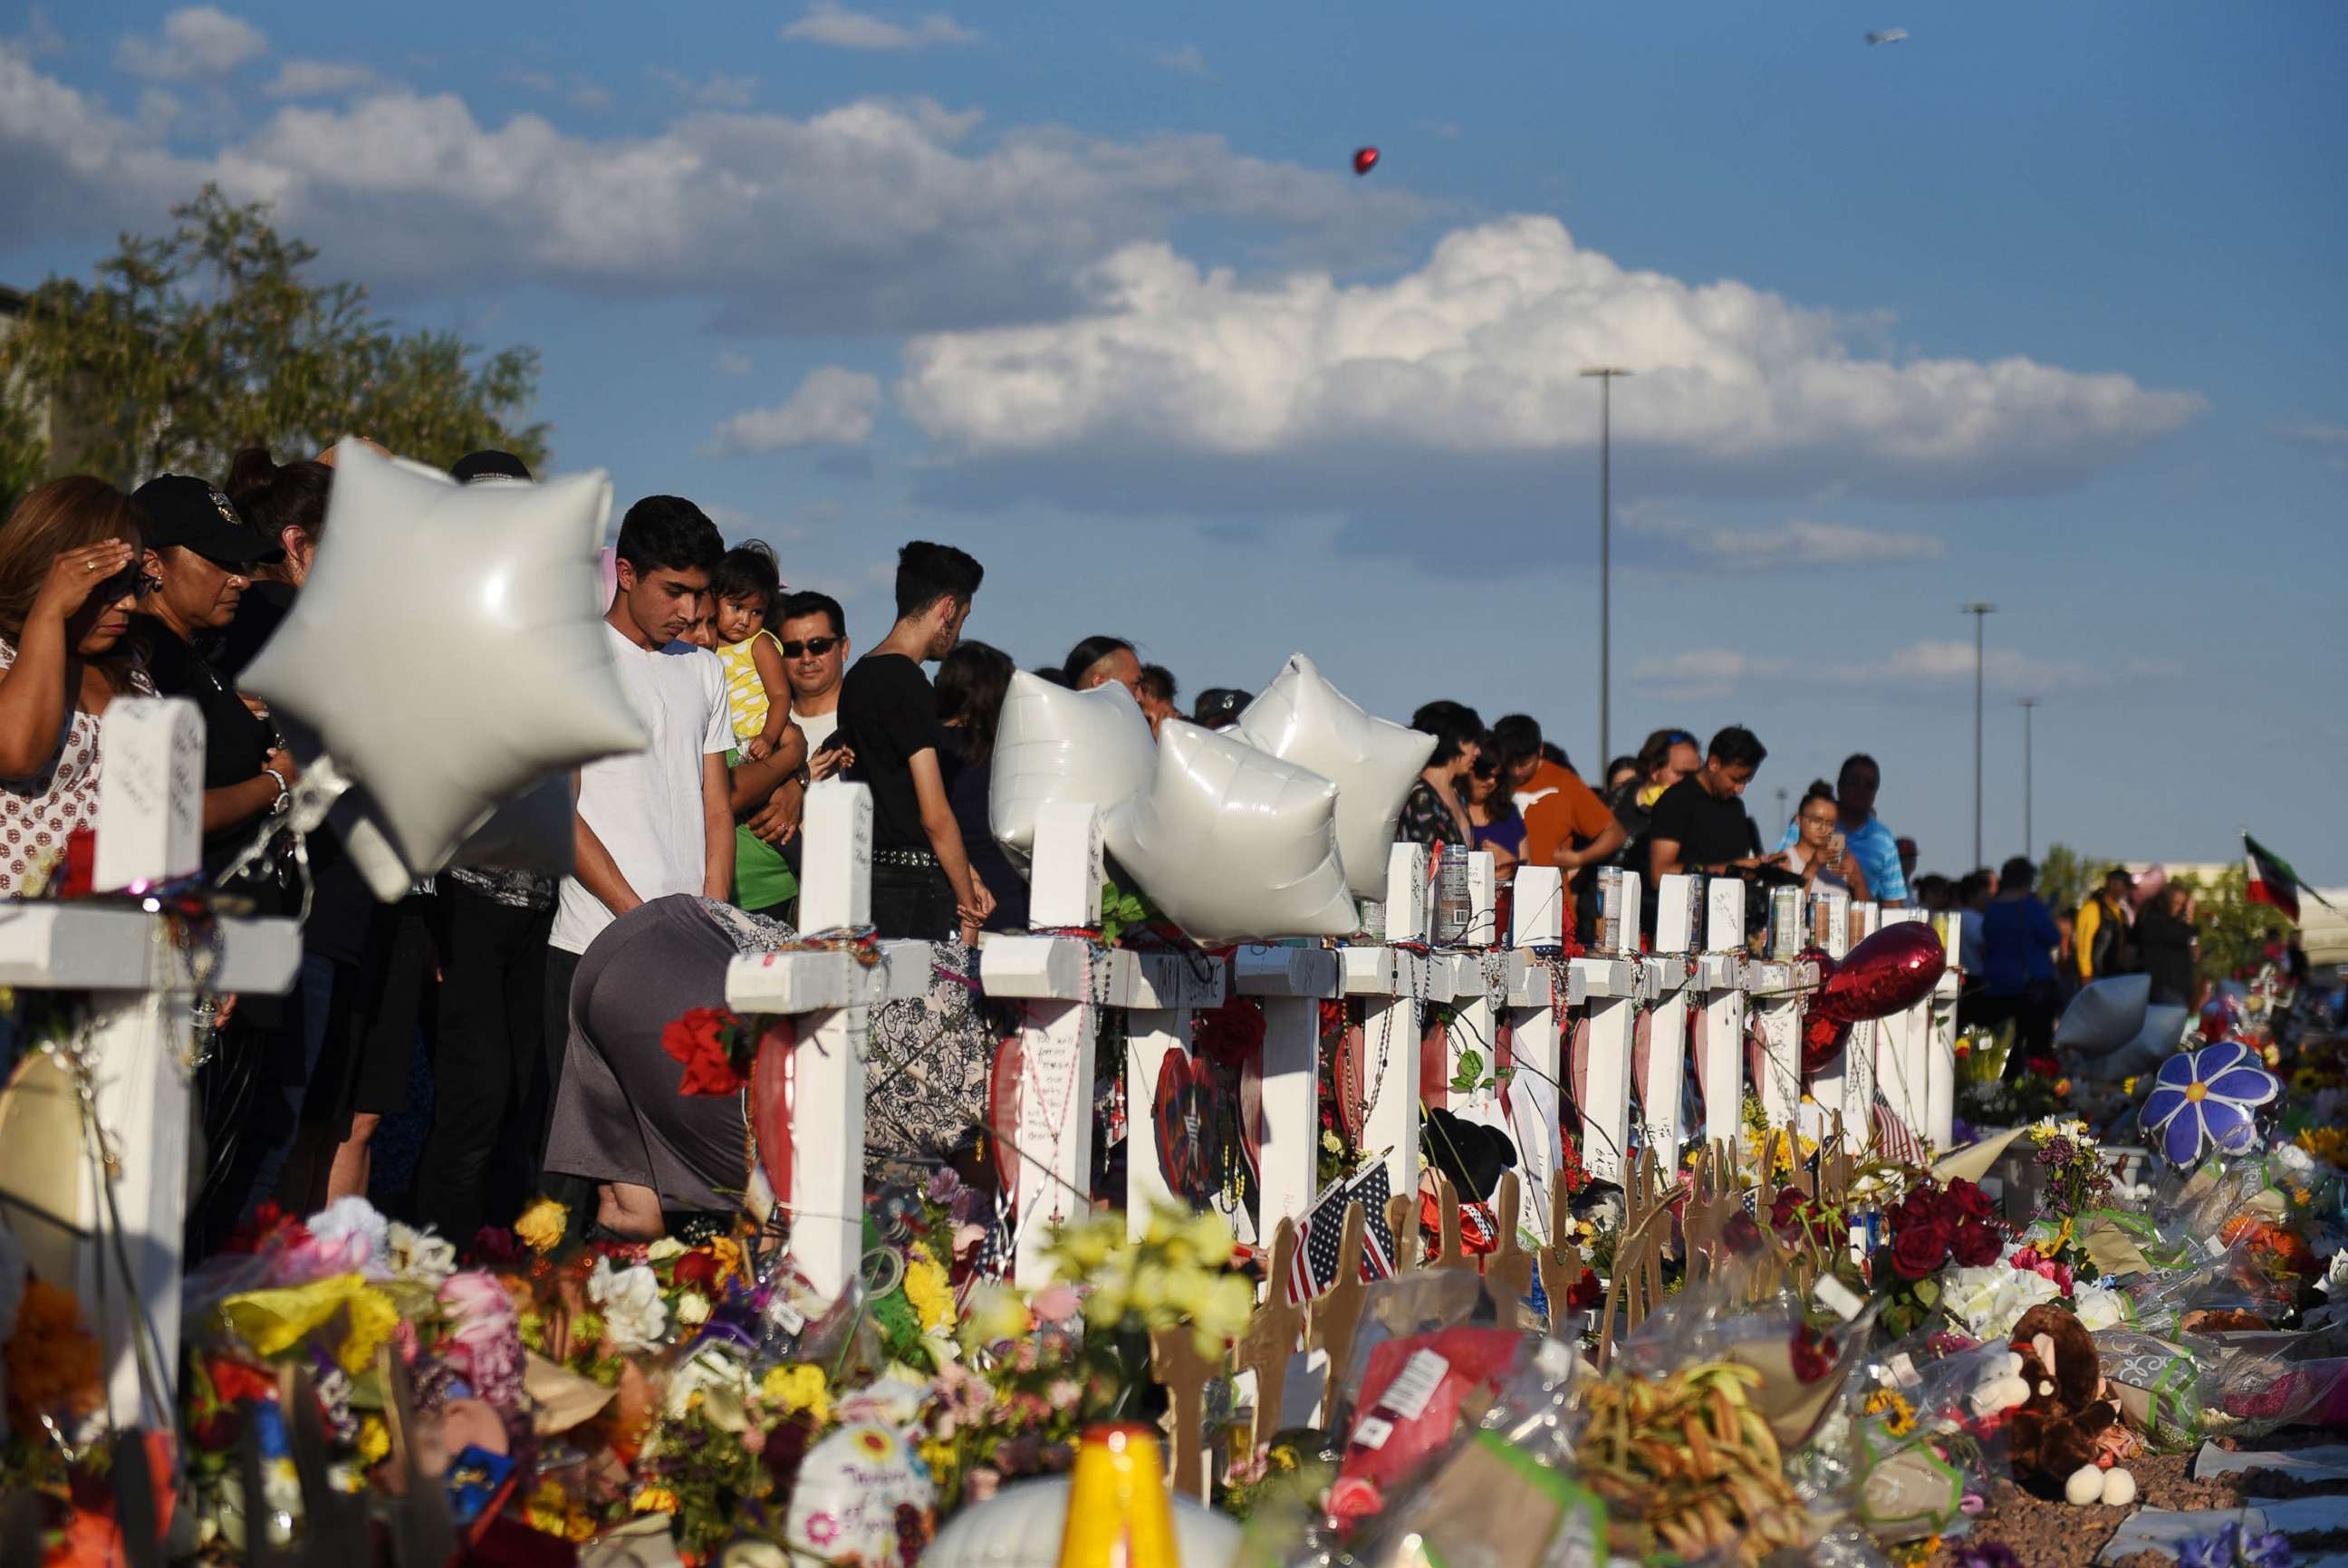 PHOTO: People gather to pay their respects at a growing memorial three days after a mass shooting at a Walmart store in El Paso, Texas, August 6, 2019